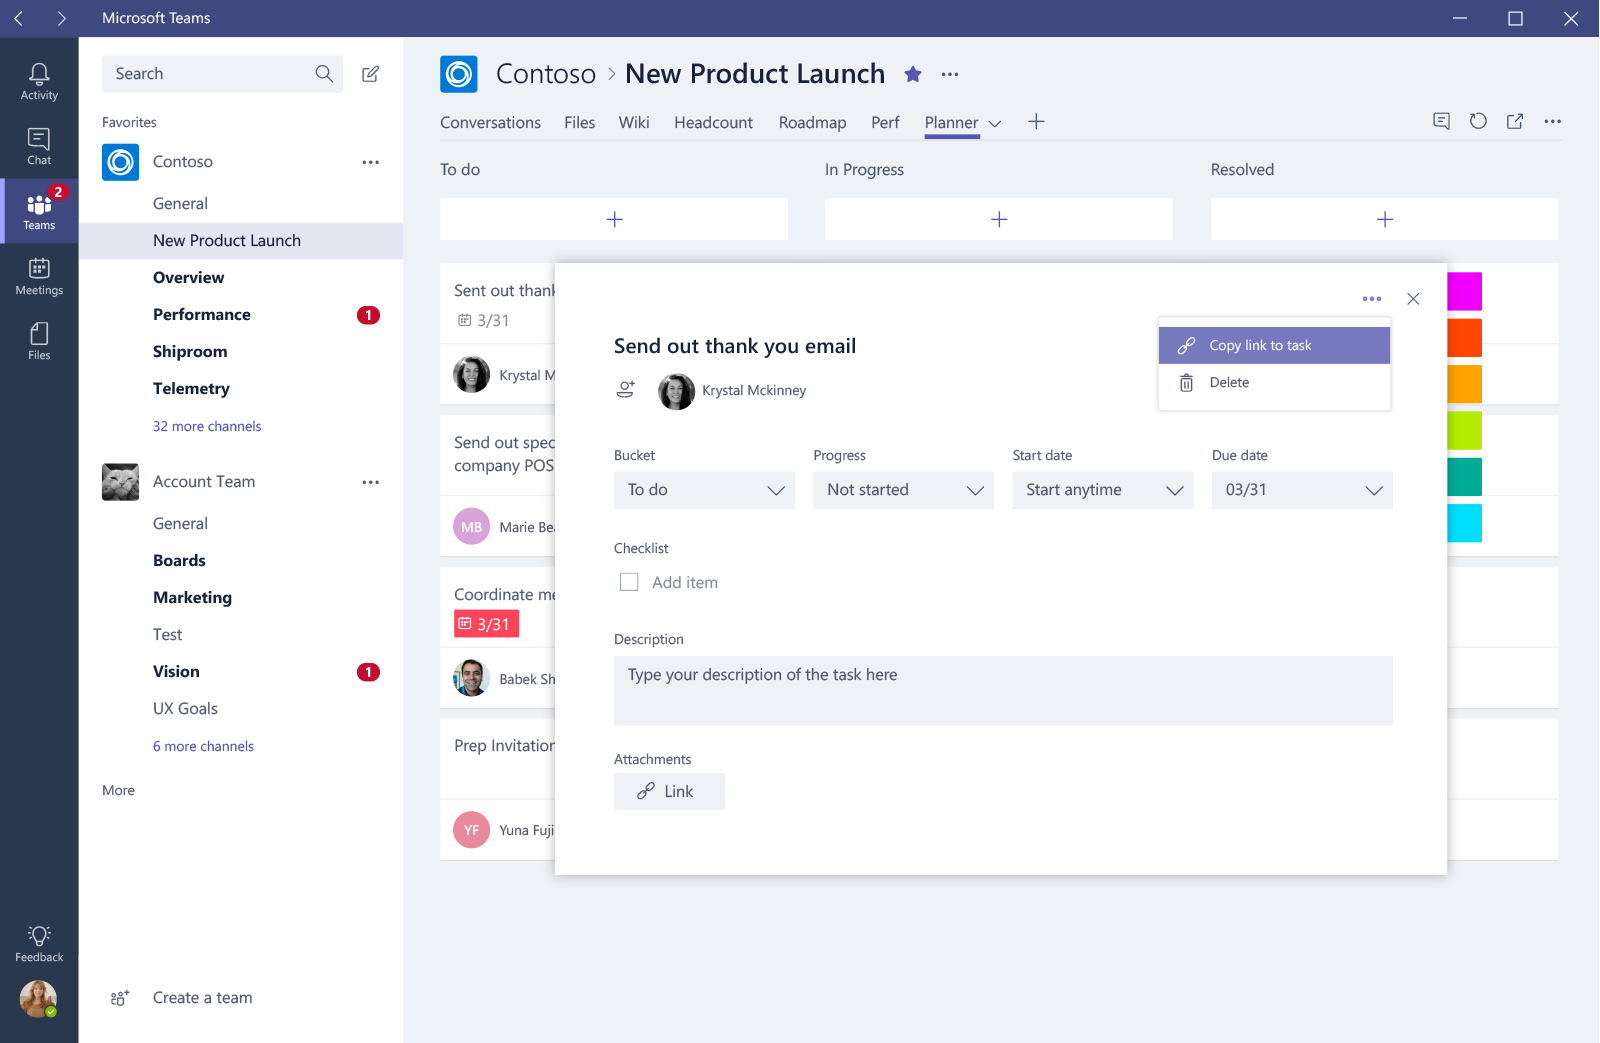 A few updates to Planner integration in Microsoft Teams